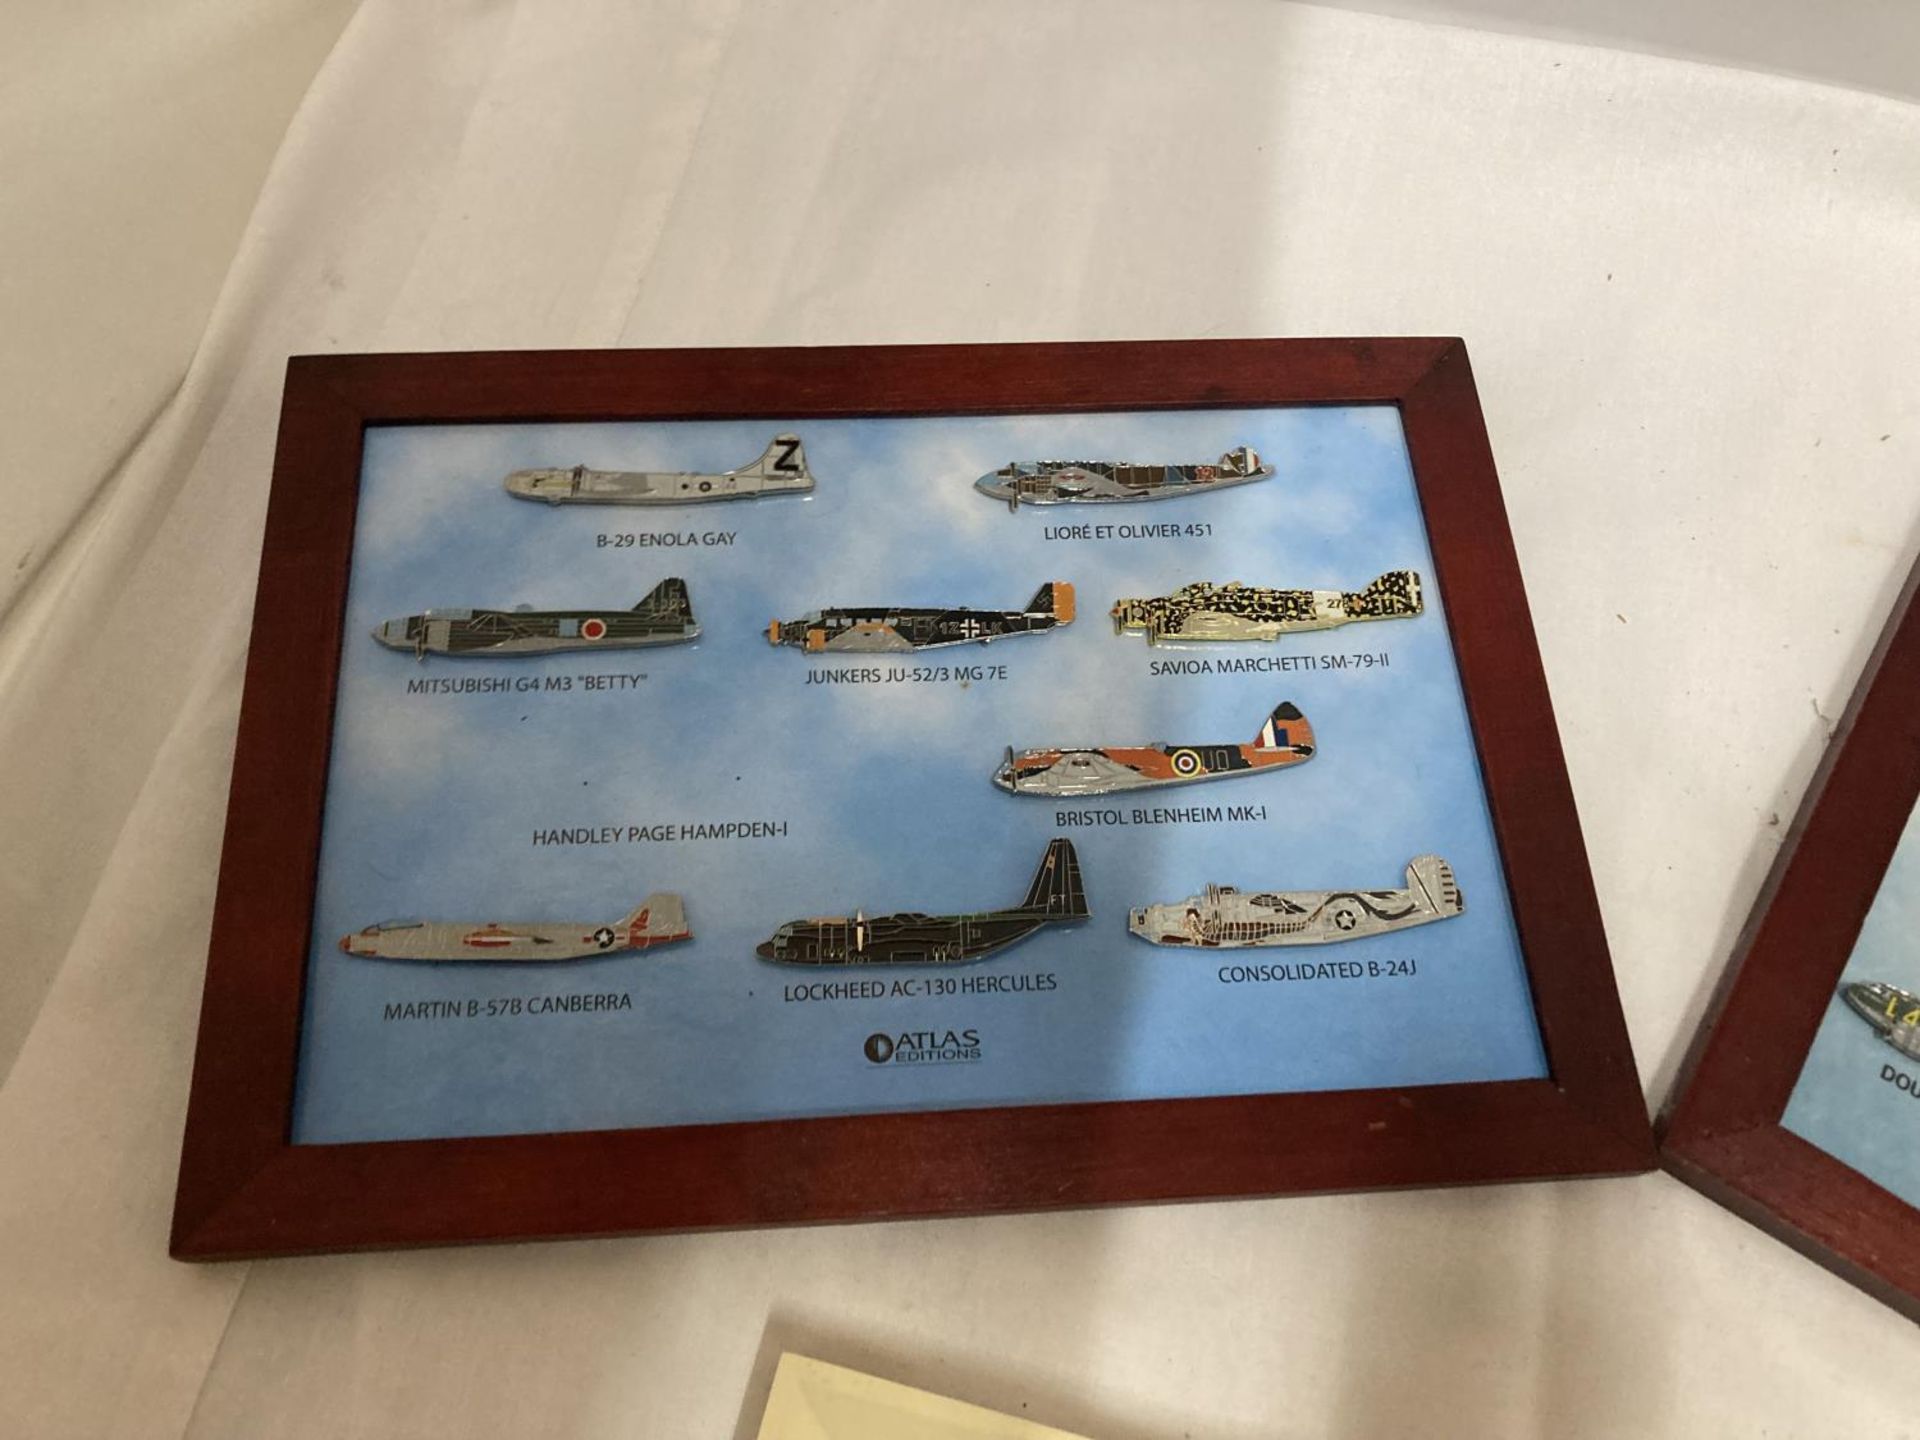 A FRAMED COLLECTION OF RAF BADGES AND TWO FRAMED PLANE COLLECTIONS - Image 4 of 4